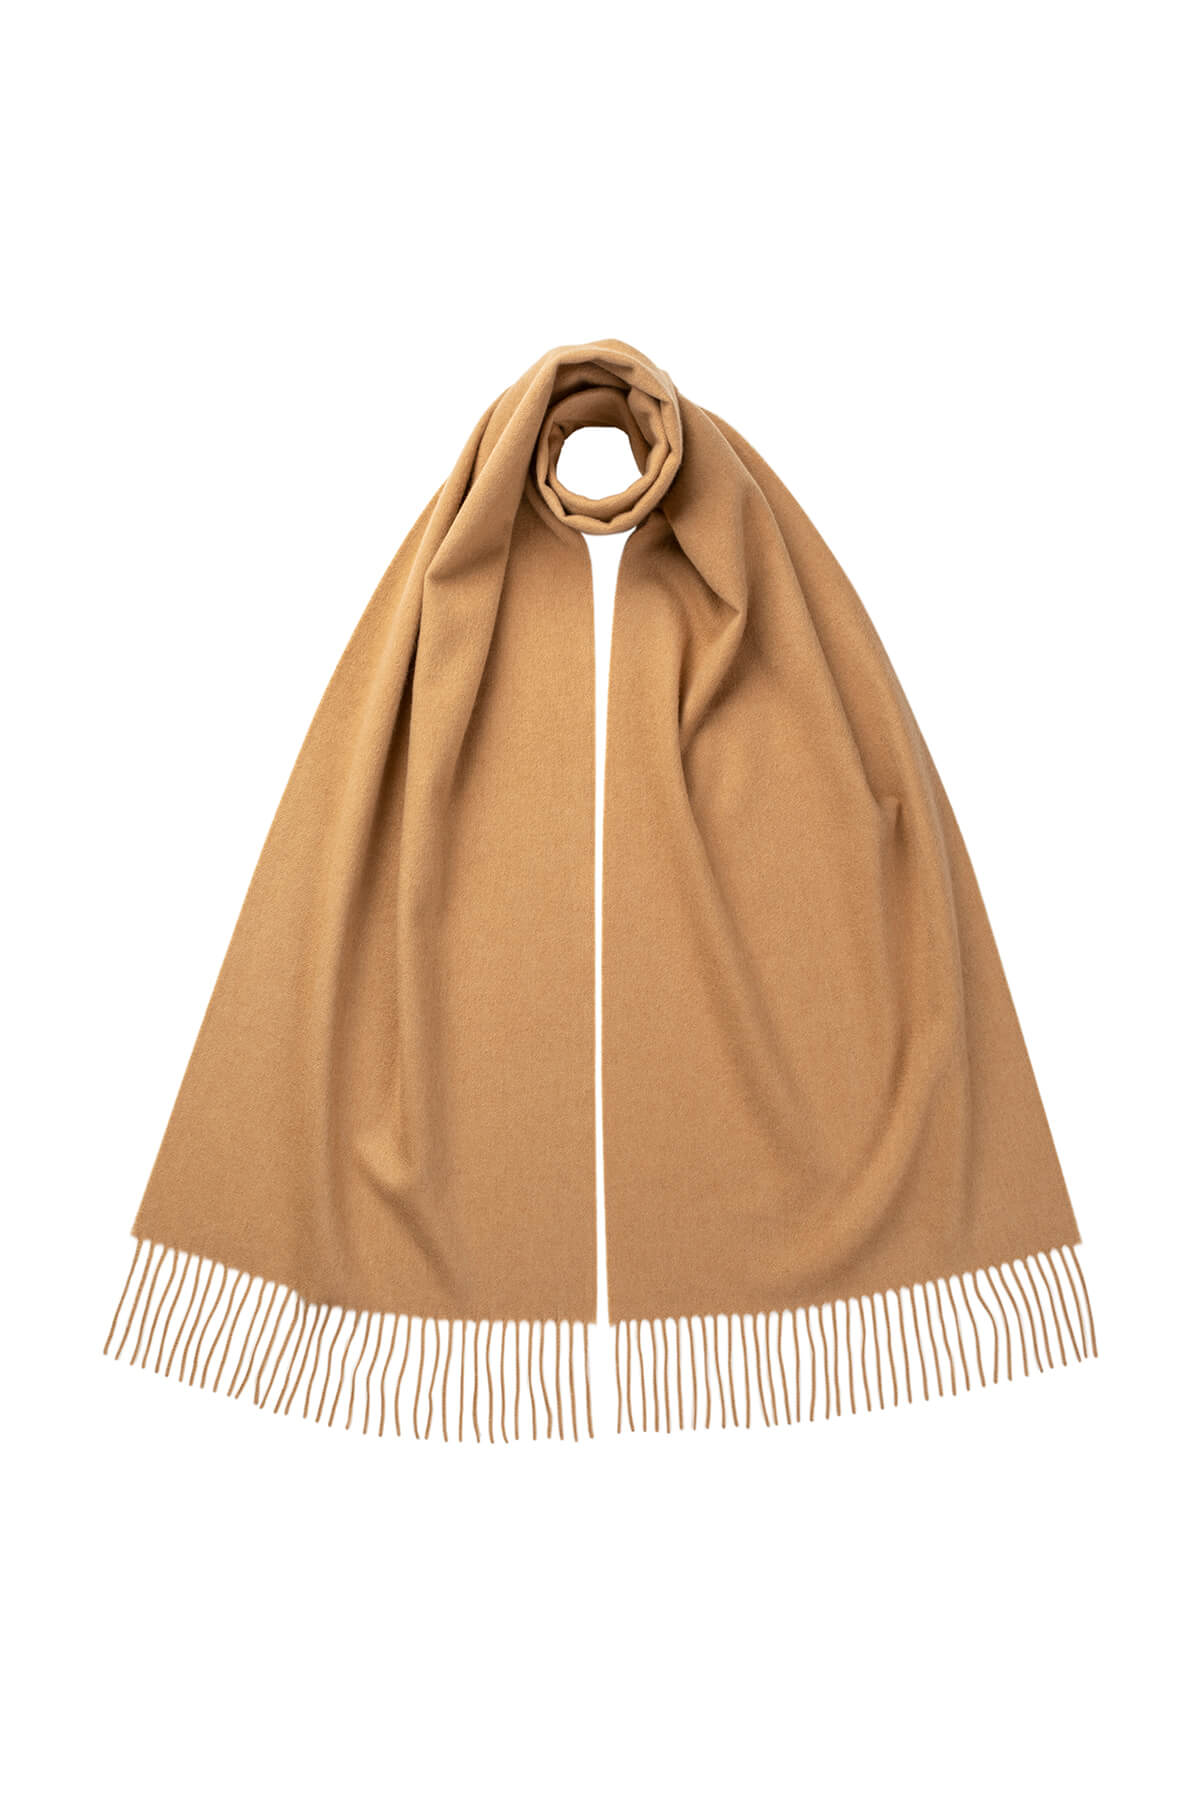 Johnstons of Elgin Ultrafine Merino Scarf in Camel on a white background WDC01797HB4315ONE